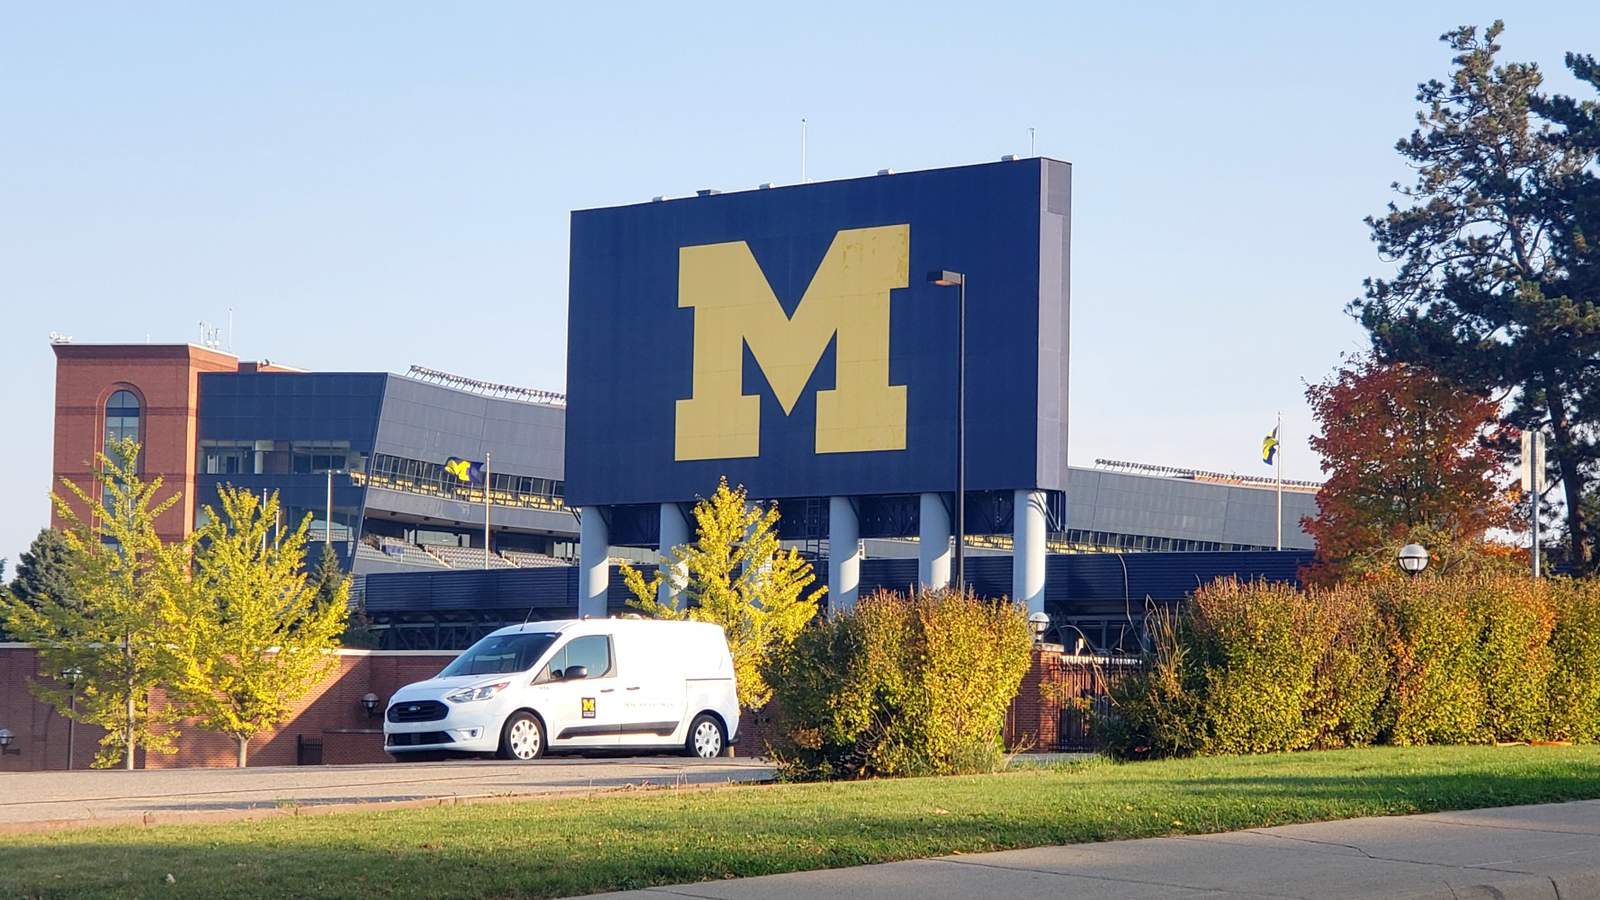 University of Michigan students asked to stay home to curb virus spread